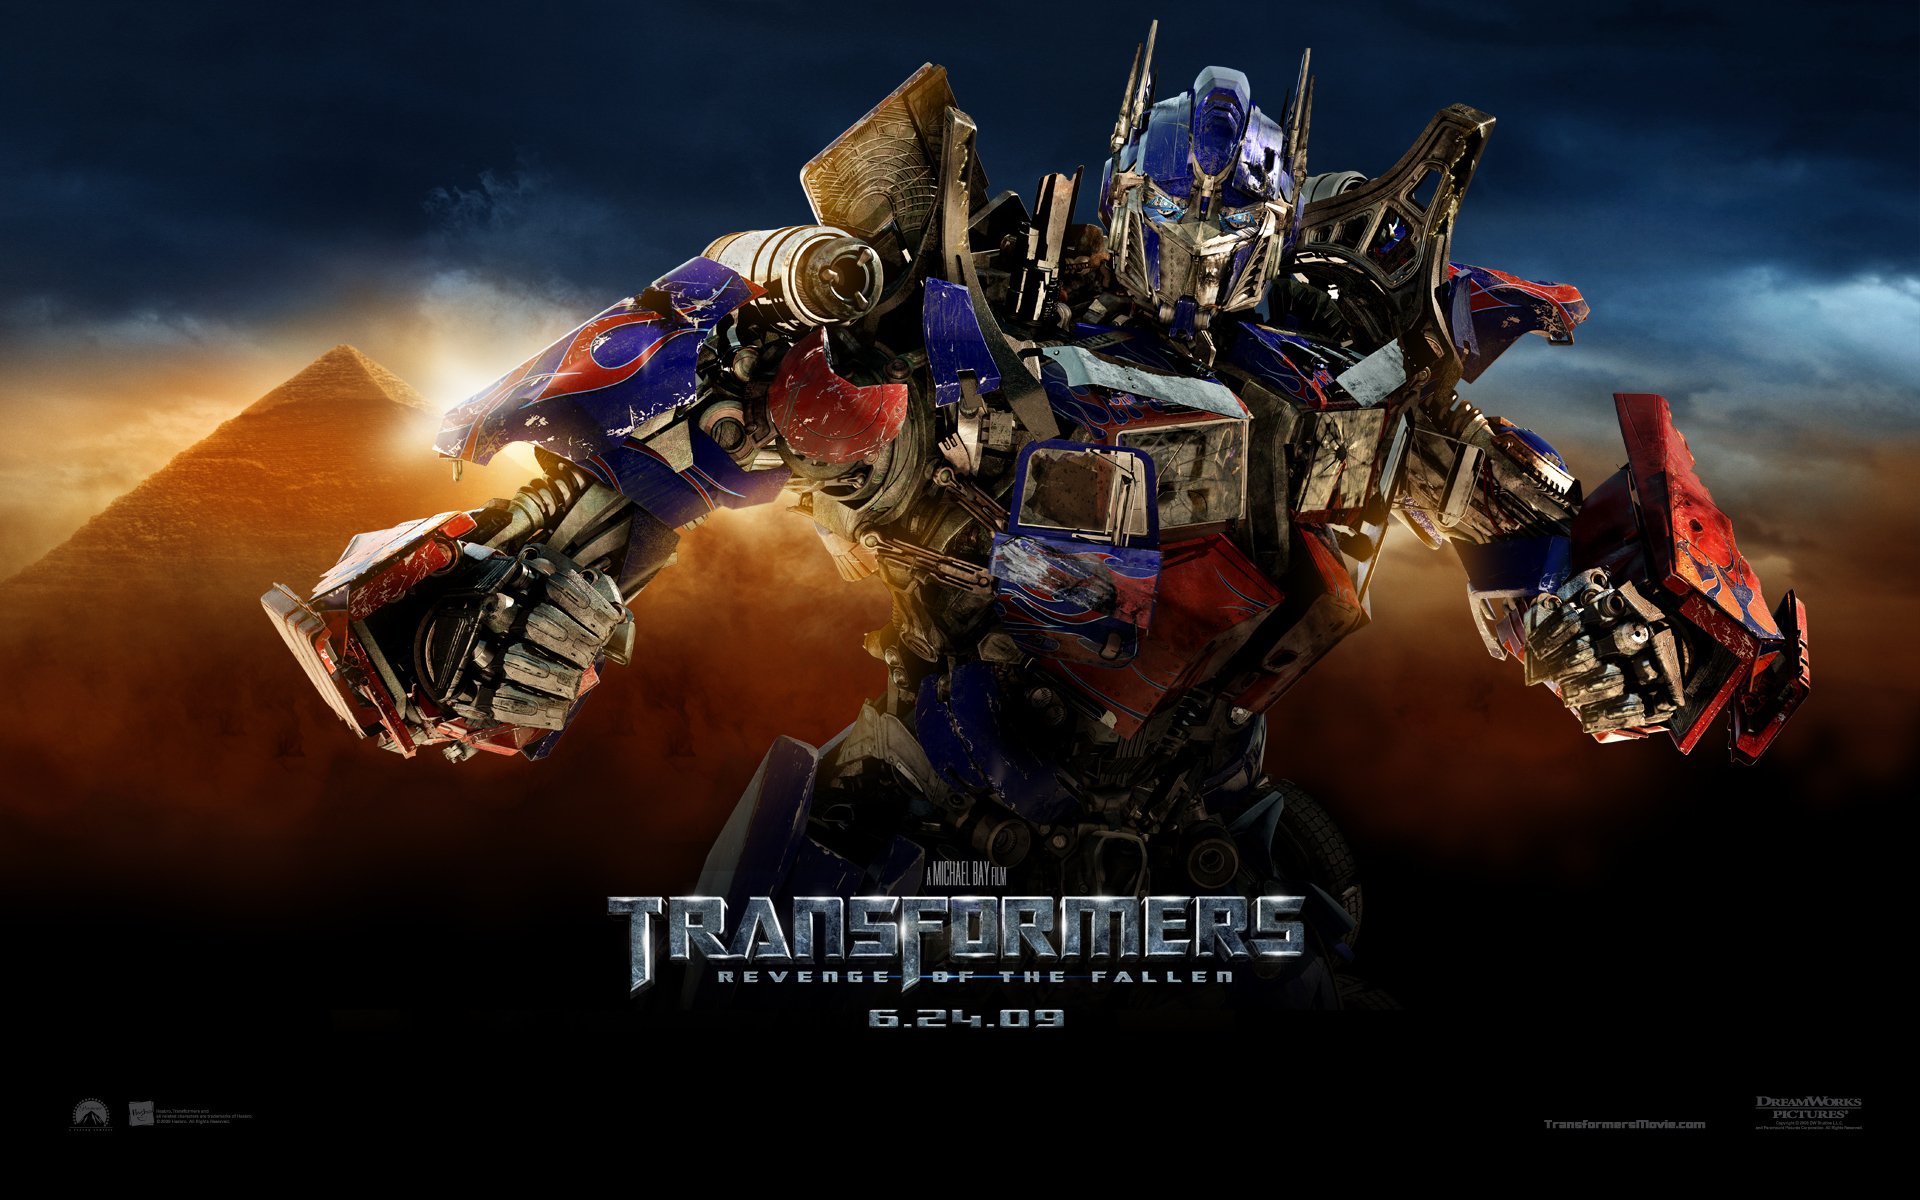 download the new Transformers: Revenge of the Fallen